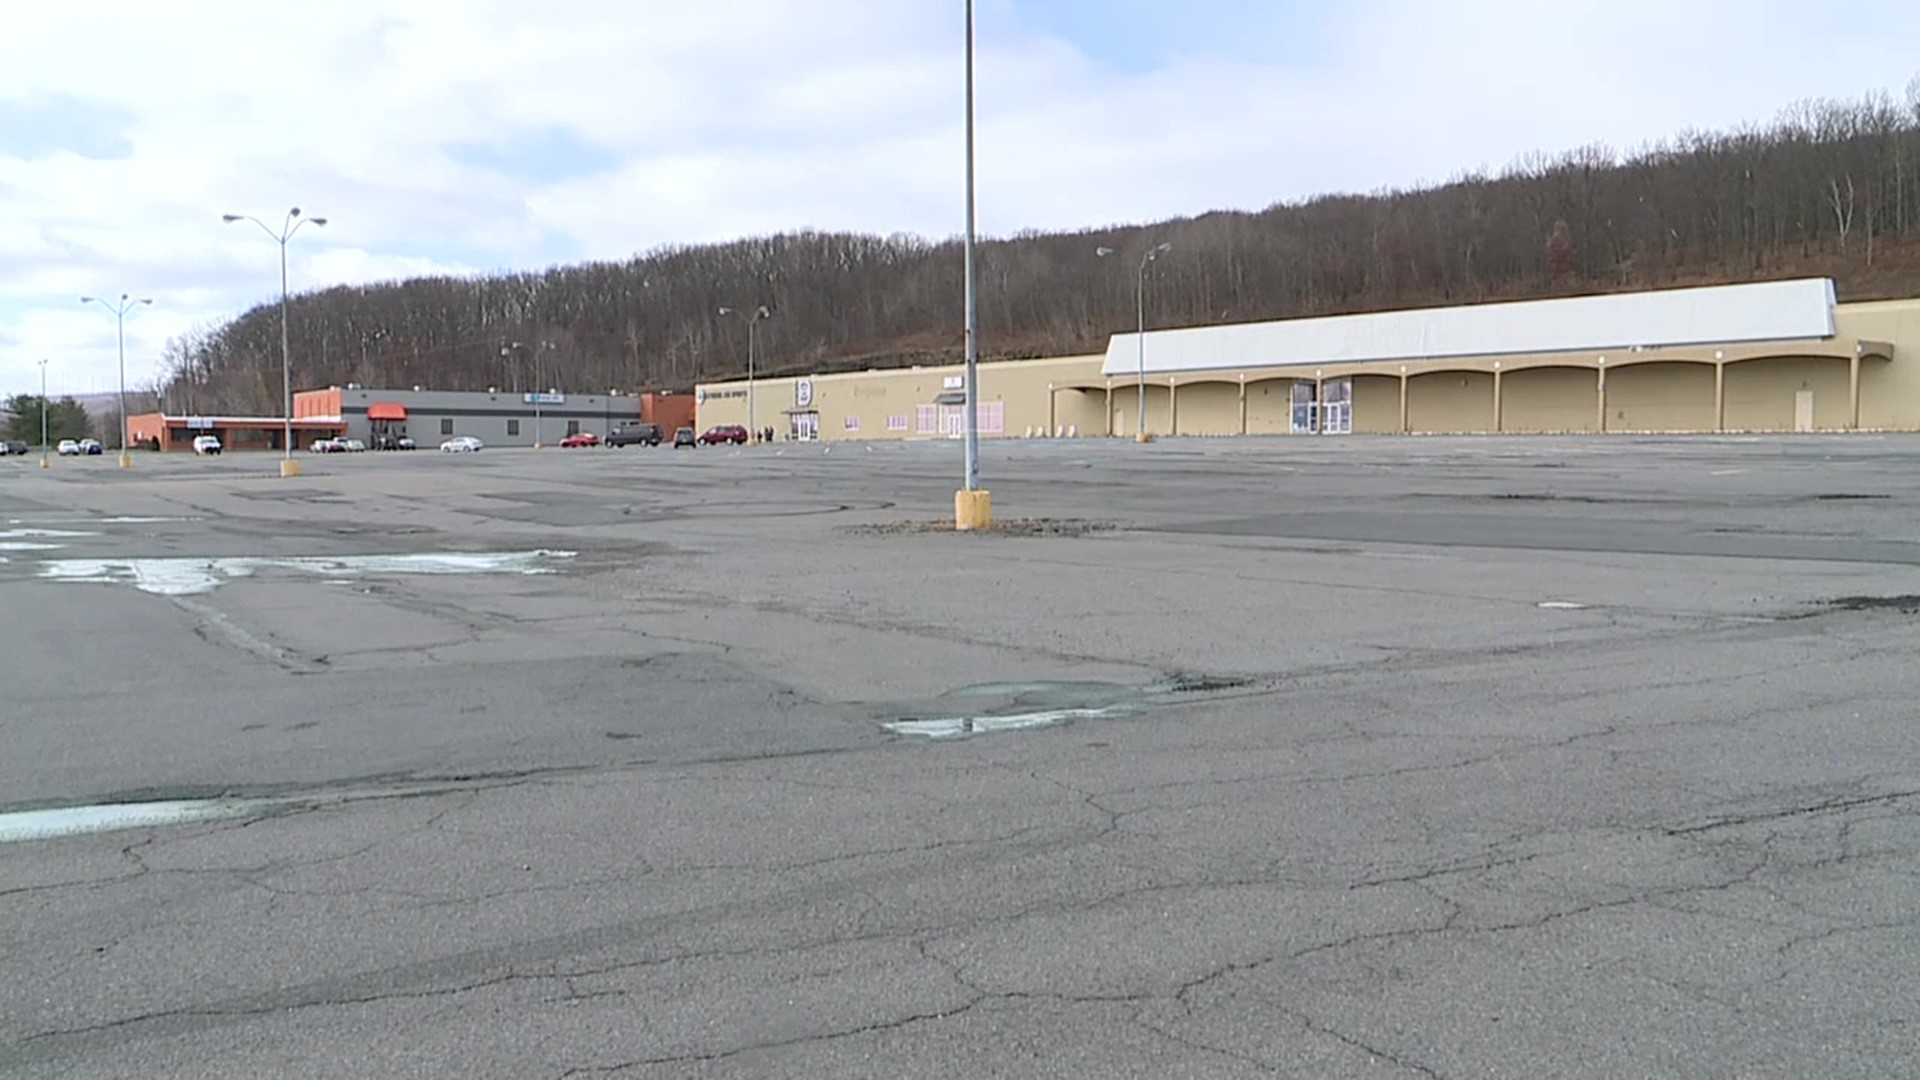 The coronavirus testing will be done at the former Kmart parking lot in Dickson City beginning Saturday.